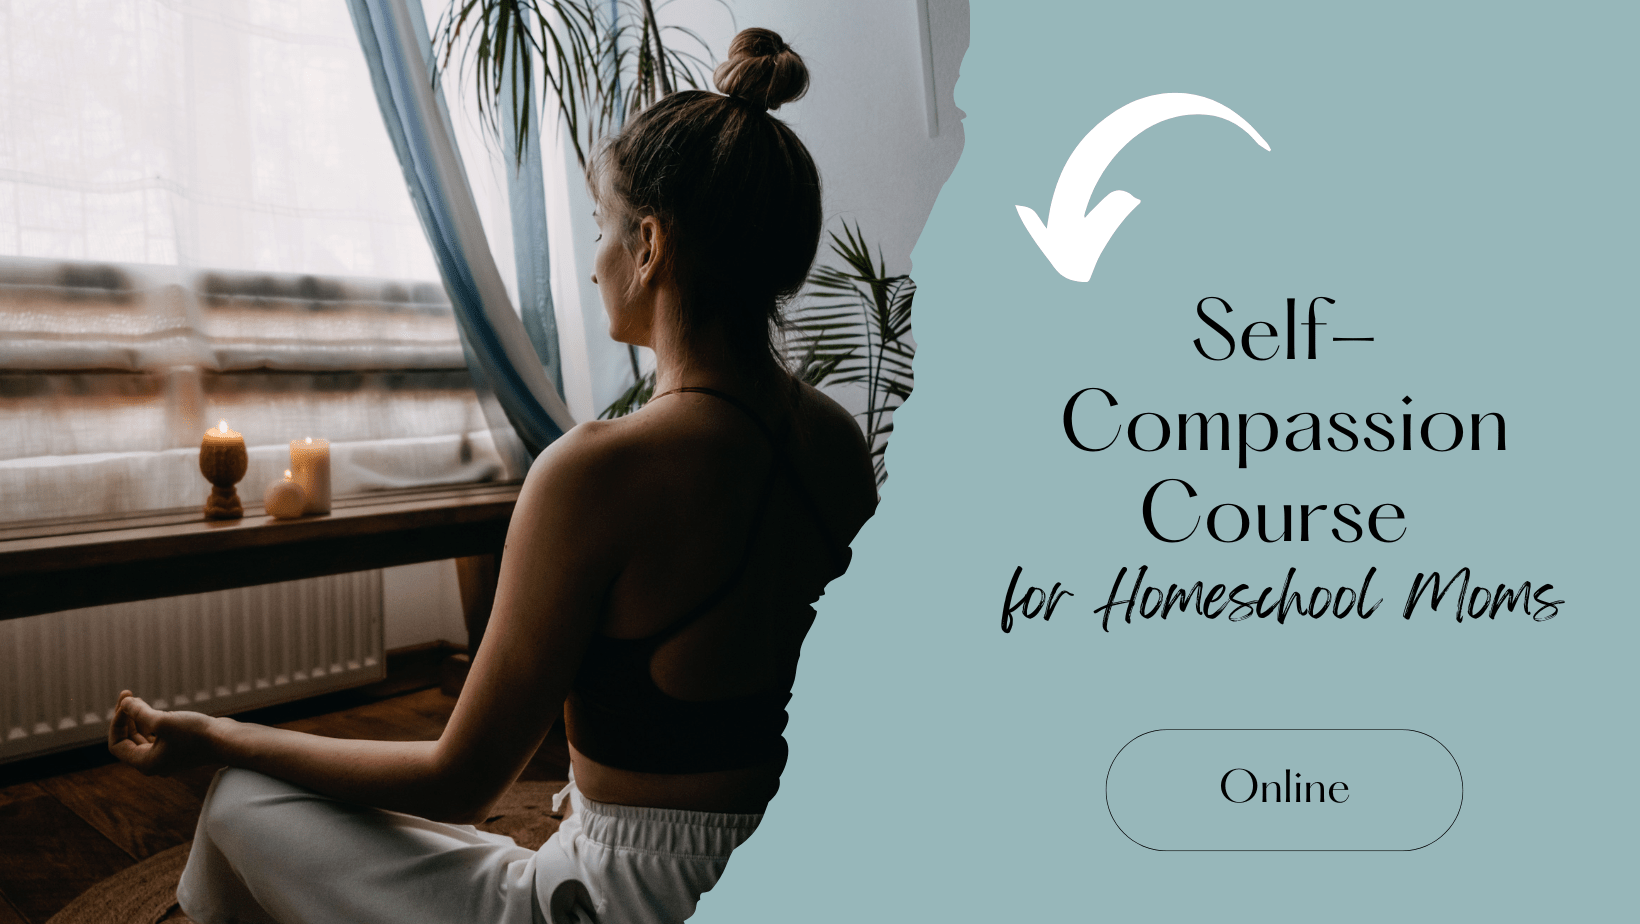 Self-Compassion for Homeschool Mamas Course to address your big emotions